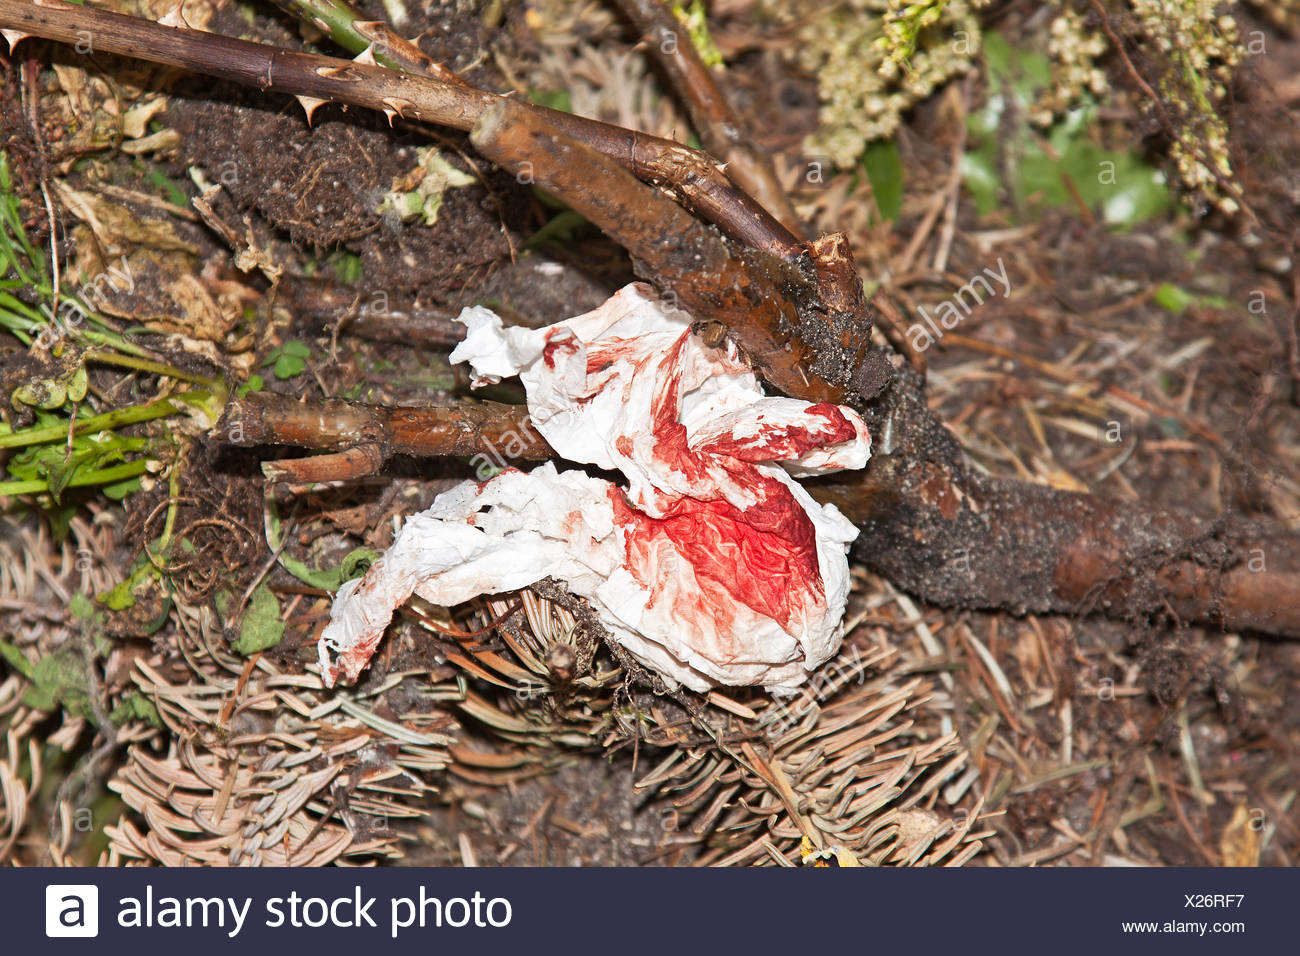 Blood Soaked Paper Tissue Lying On Branches Injury Bodily Harm